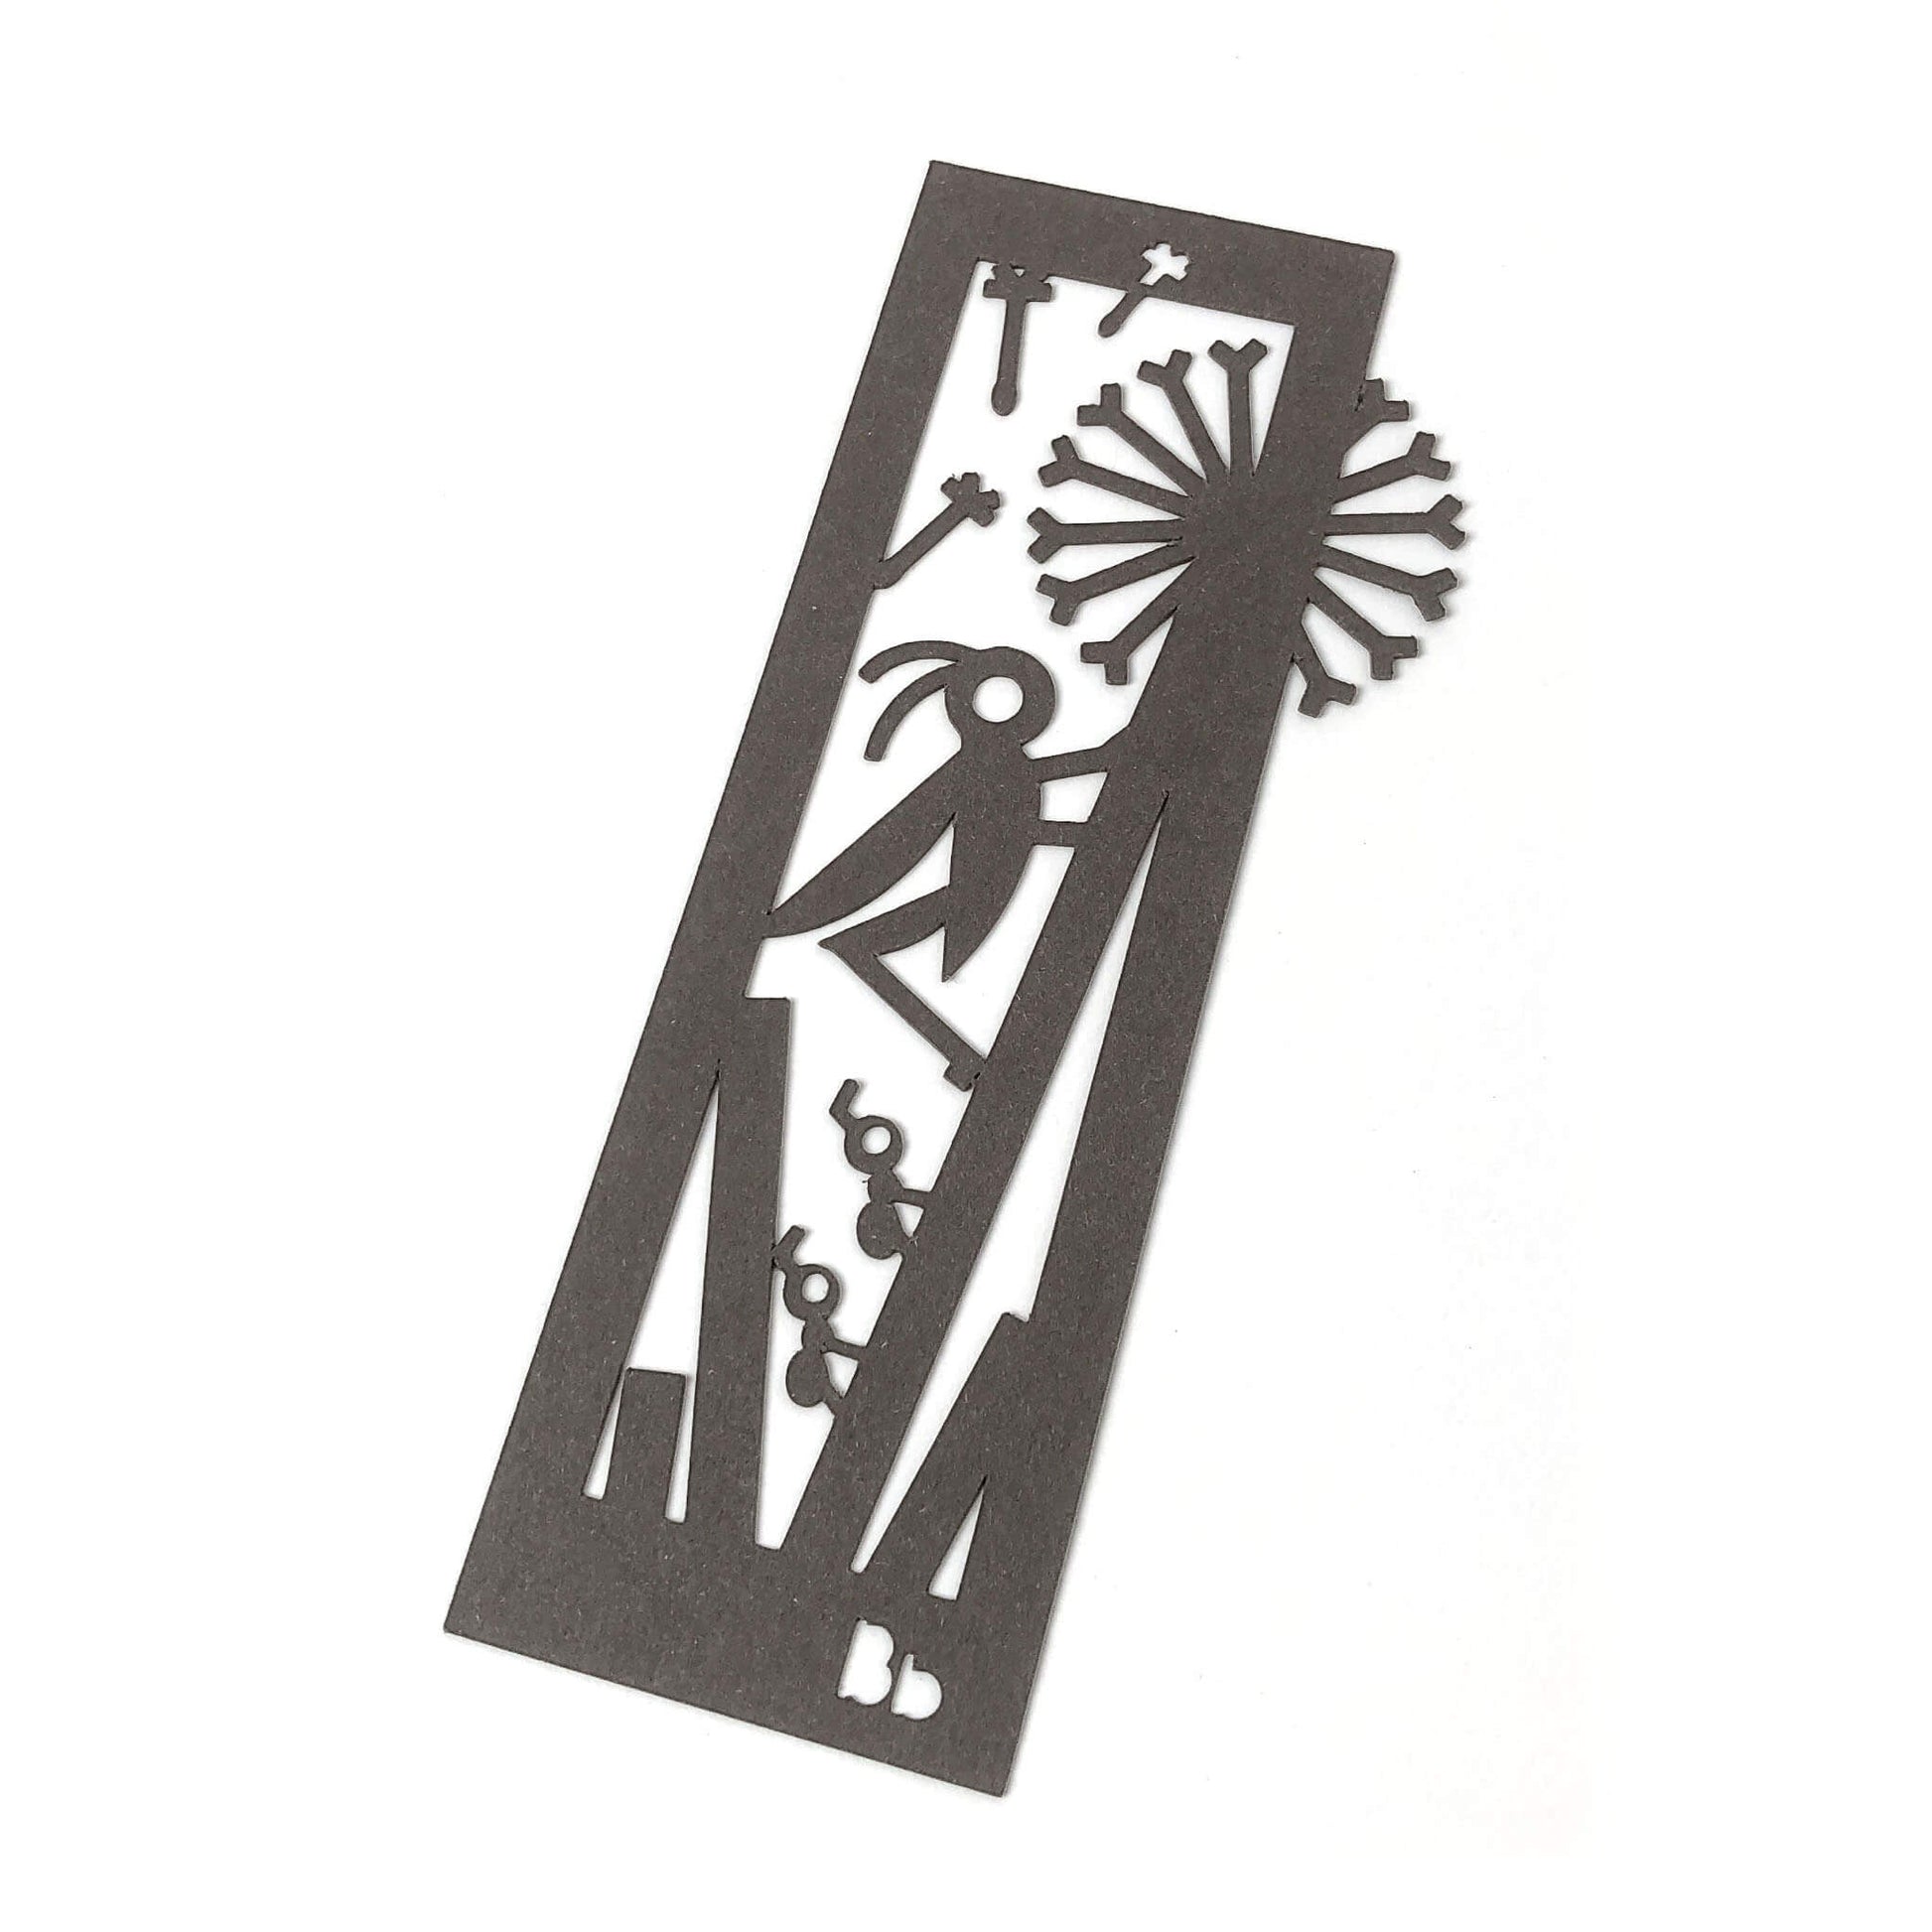 A dark brown paper bookmark with cut-outs of a cricket, ants, dandelion, and seeds surrounded by blades of grass on a white background.